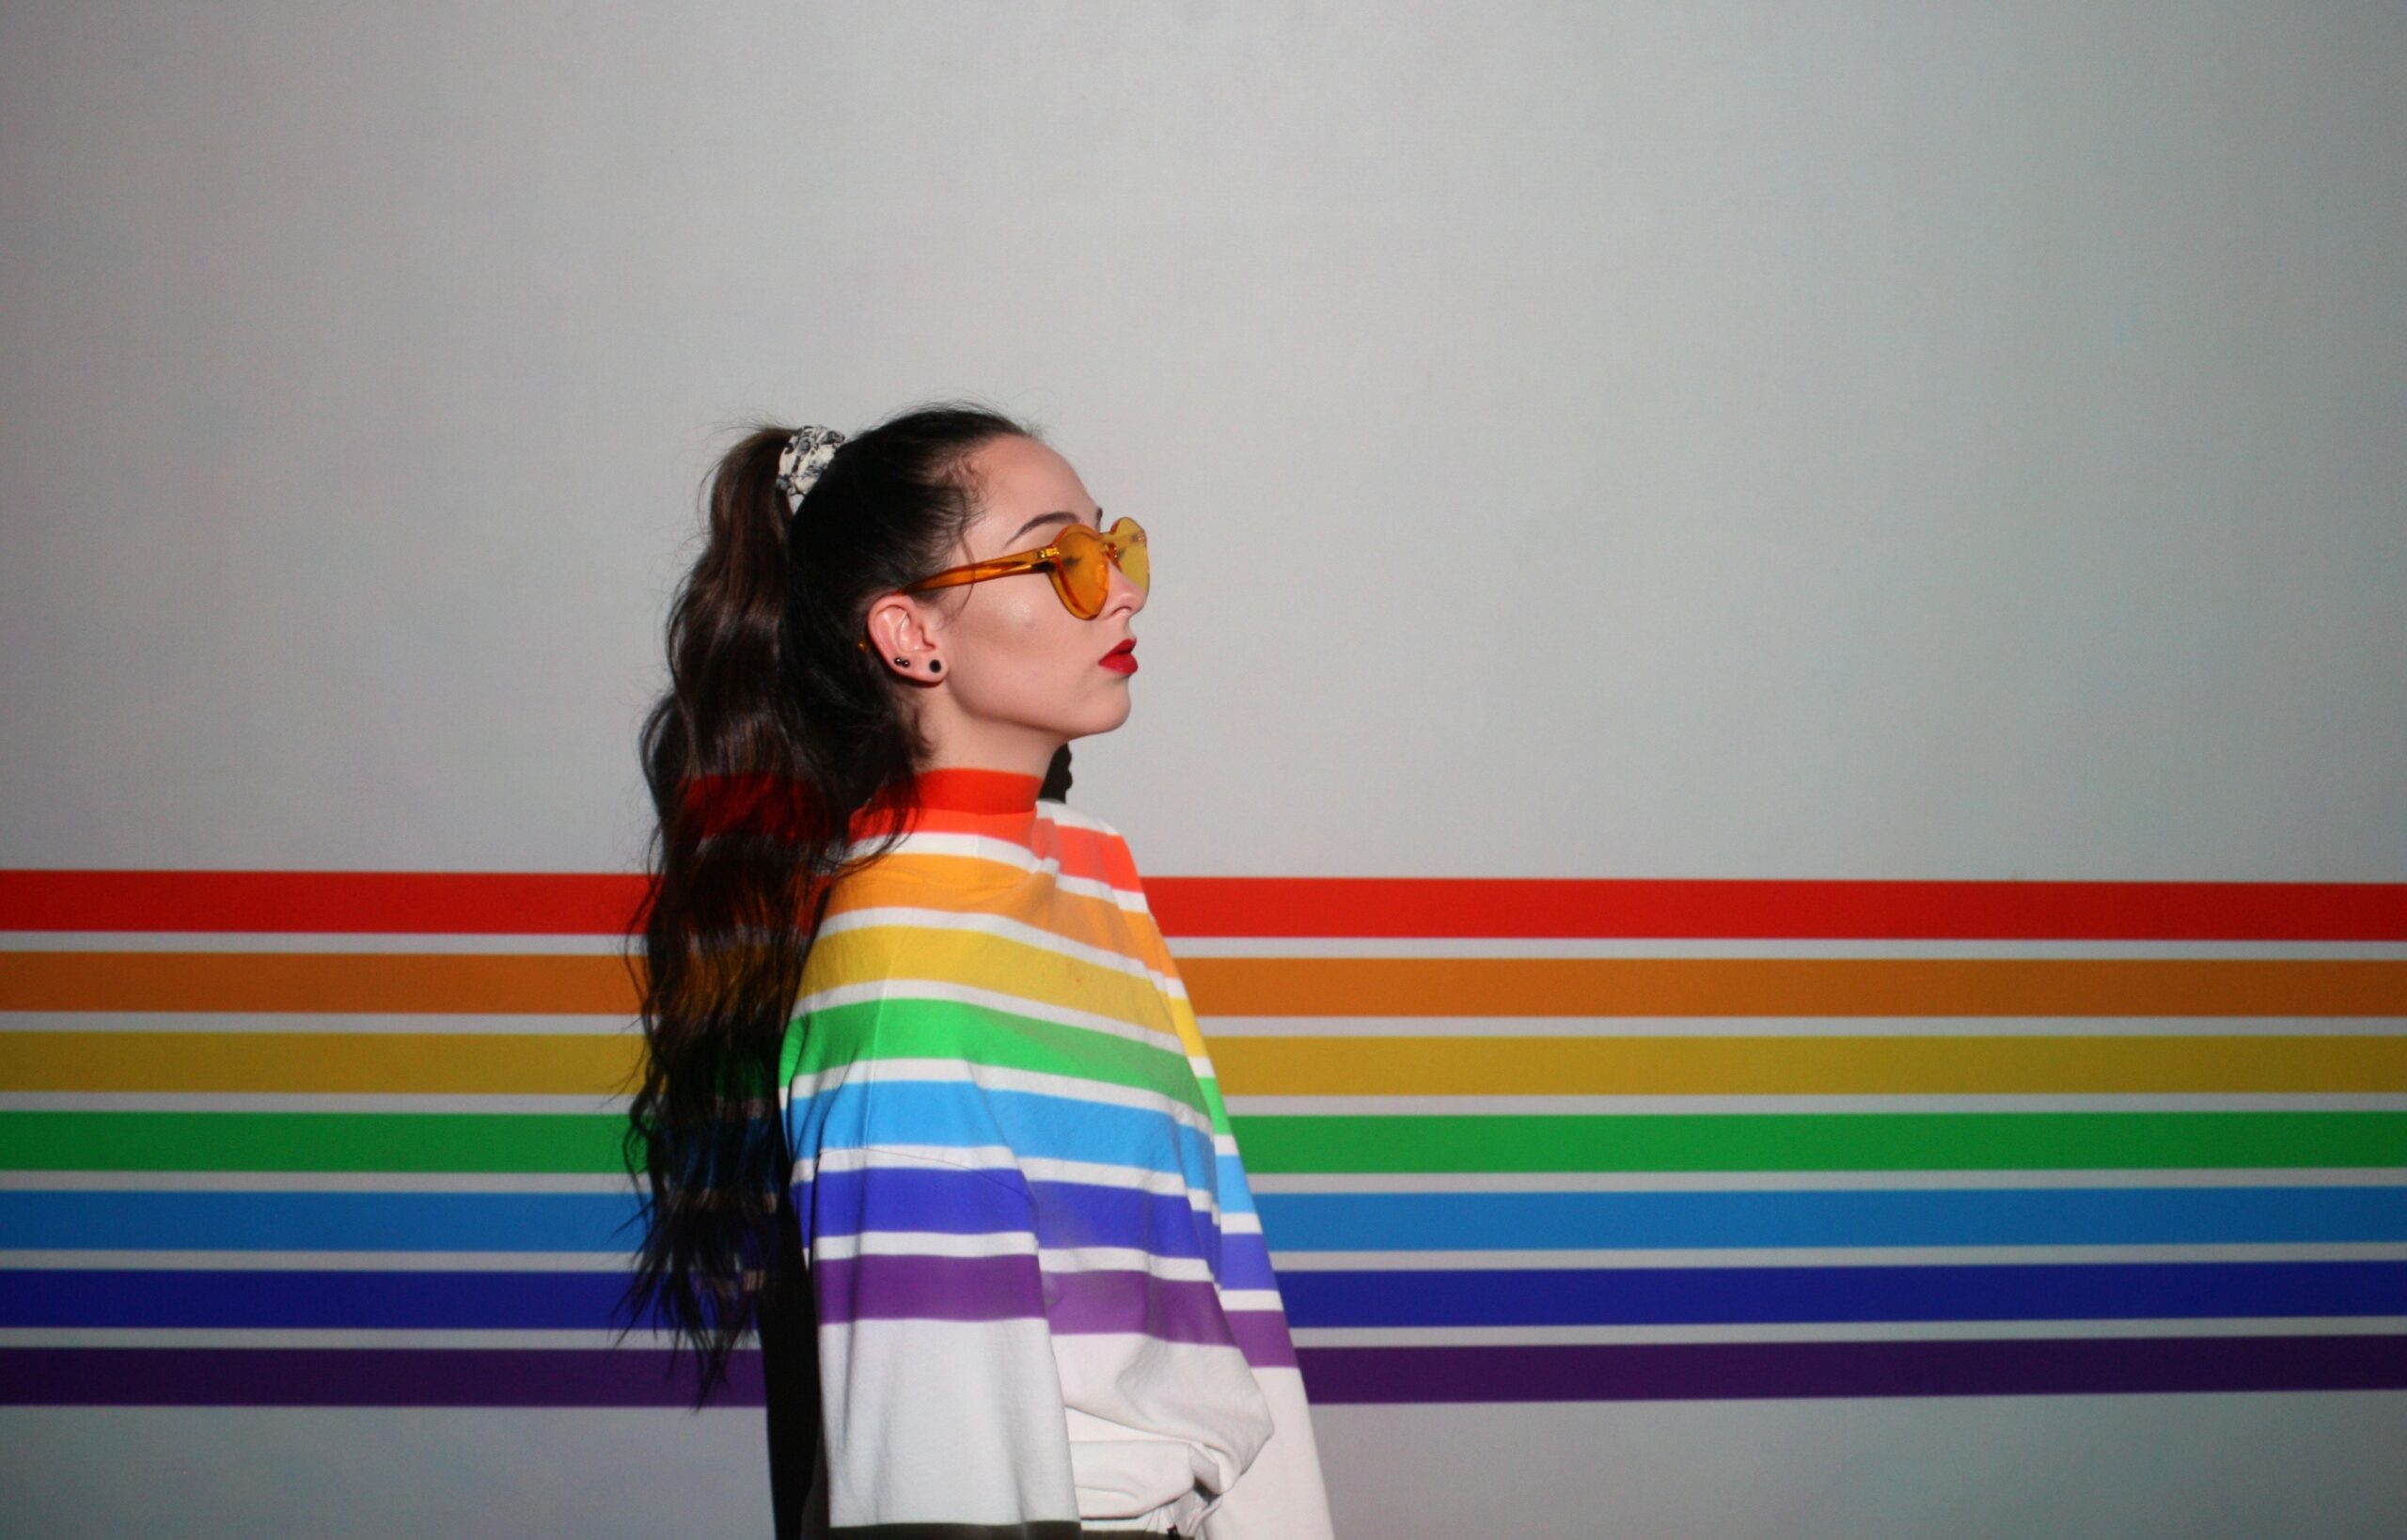 rainbow shines on person turned to the right against a white wall